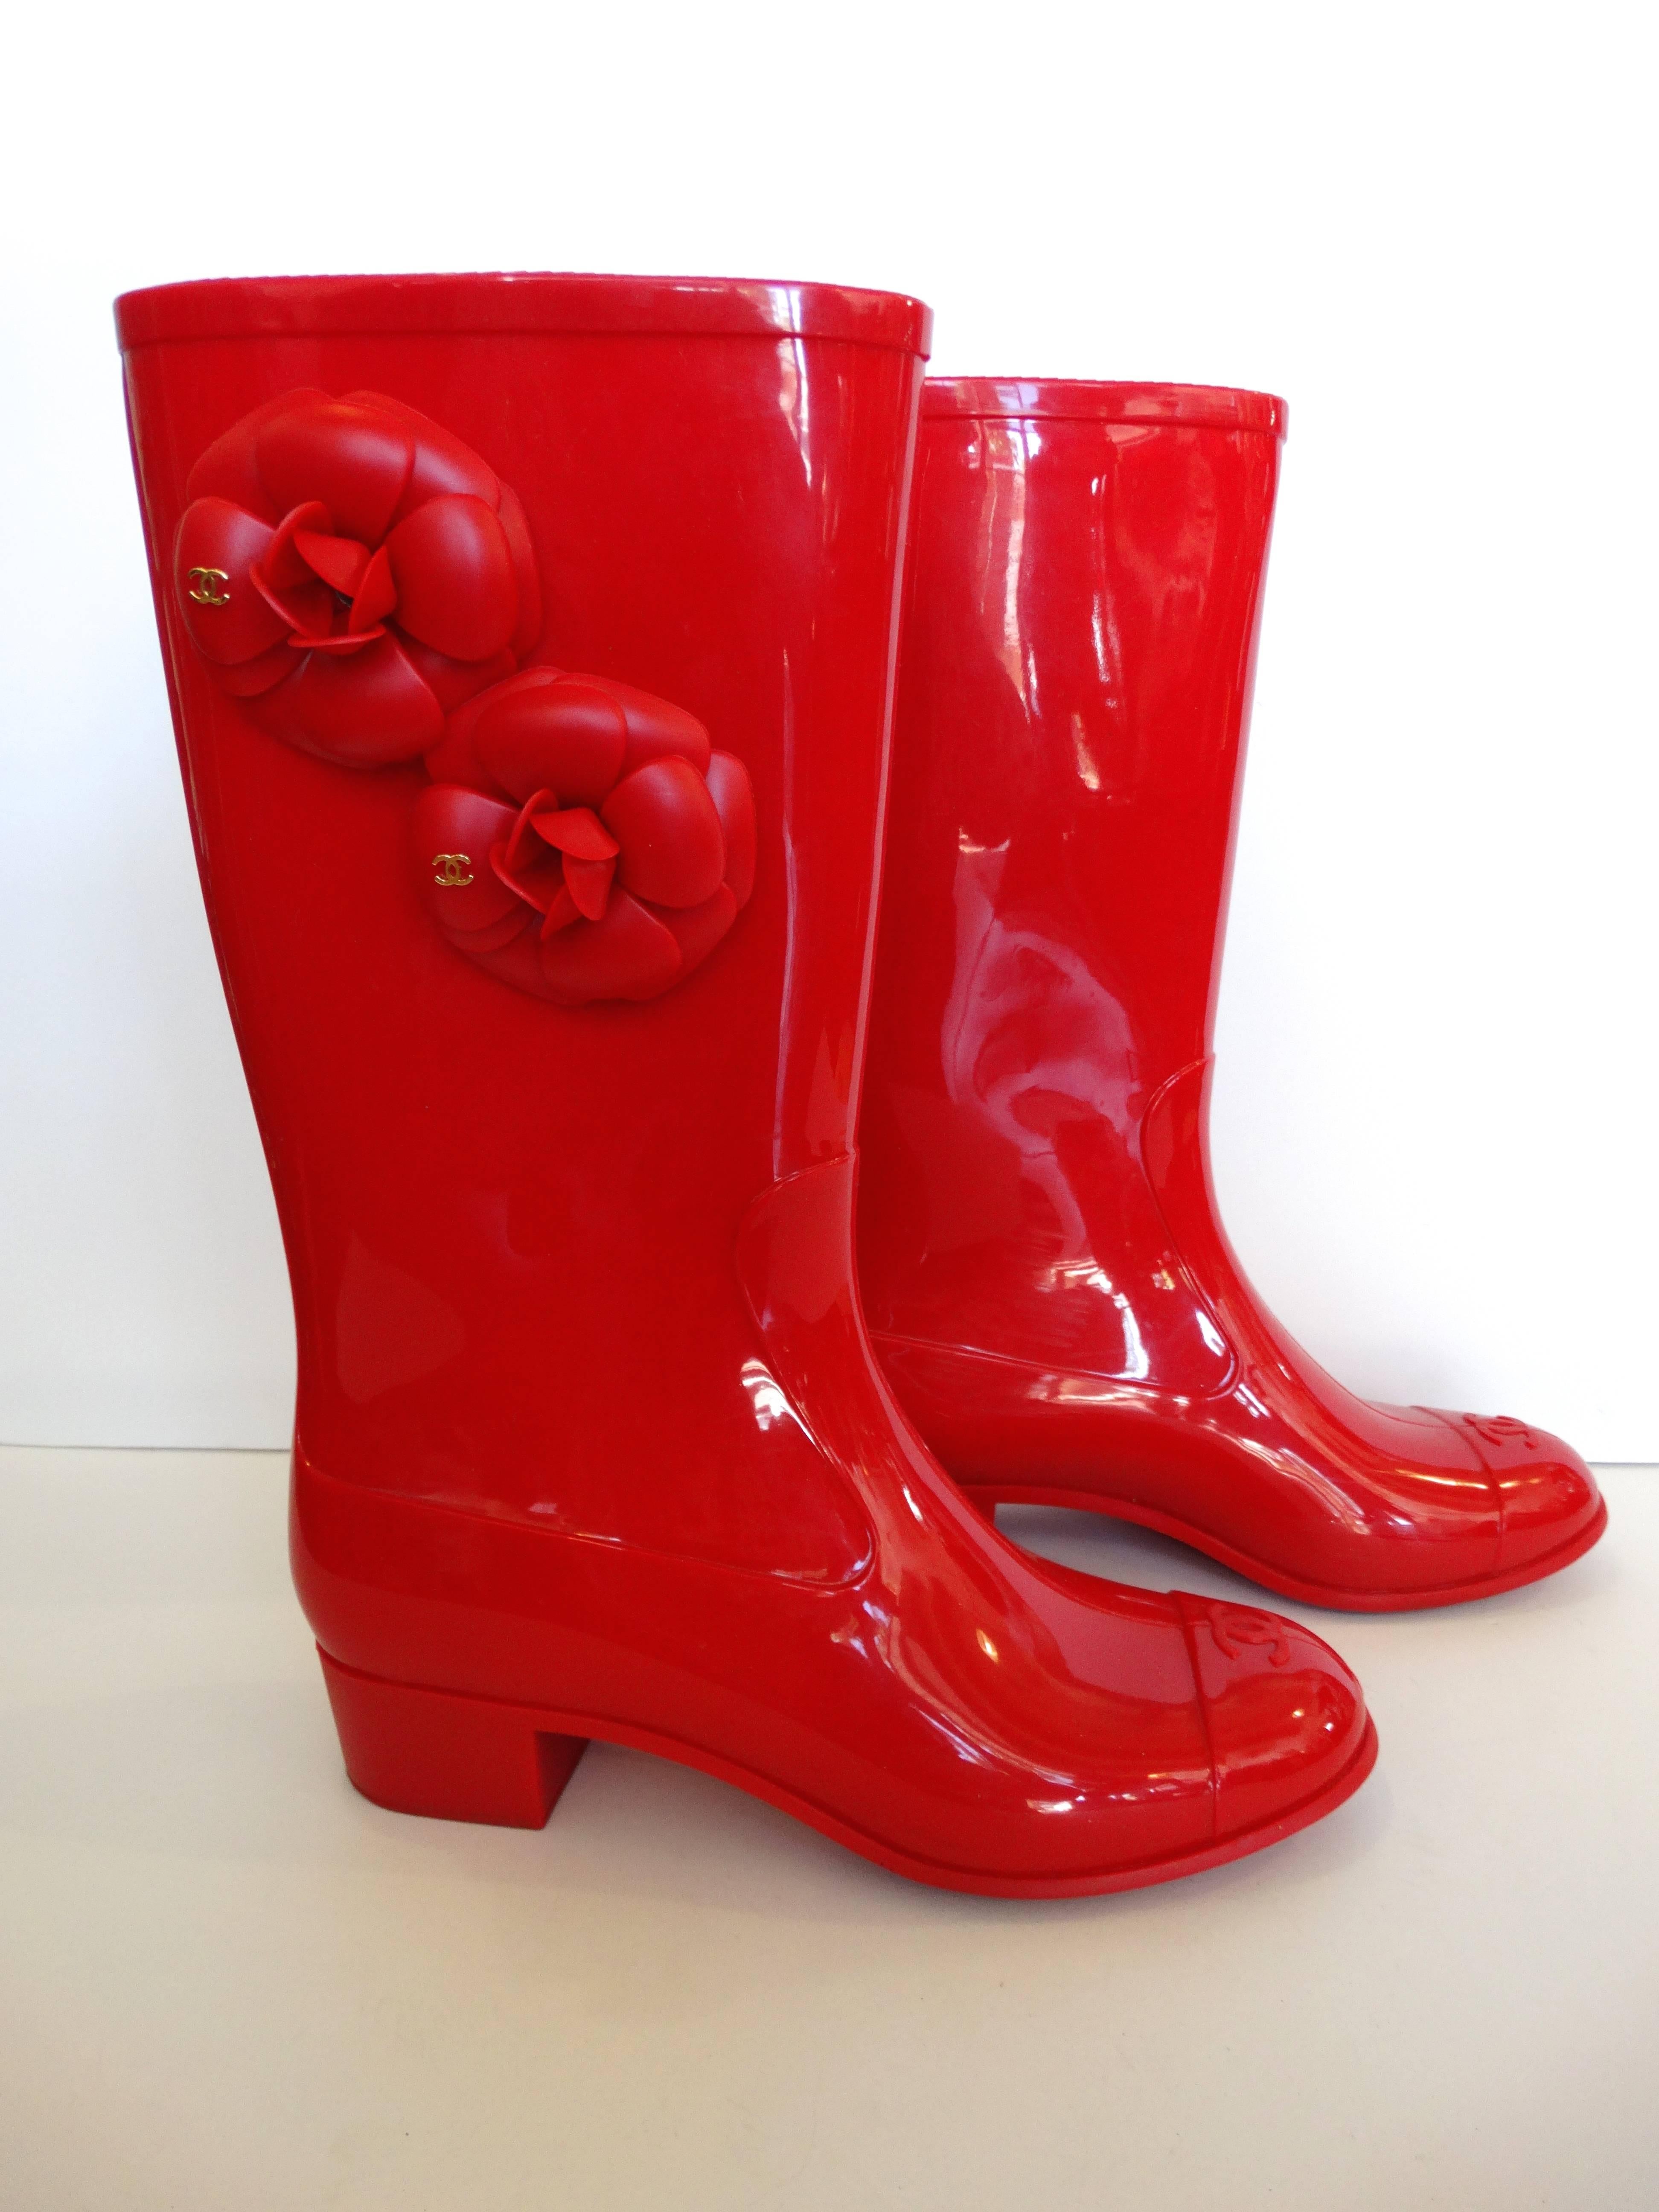 Chanel Red Camellia Flower Wellies  1